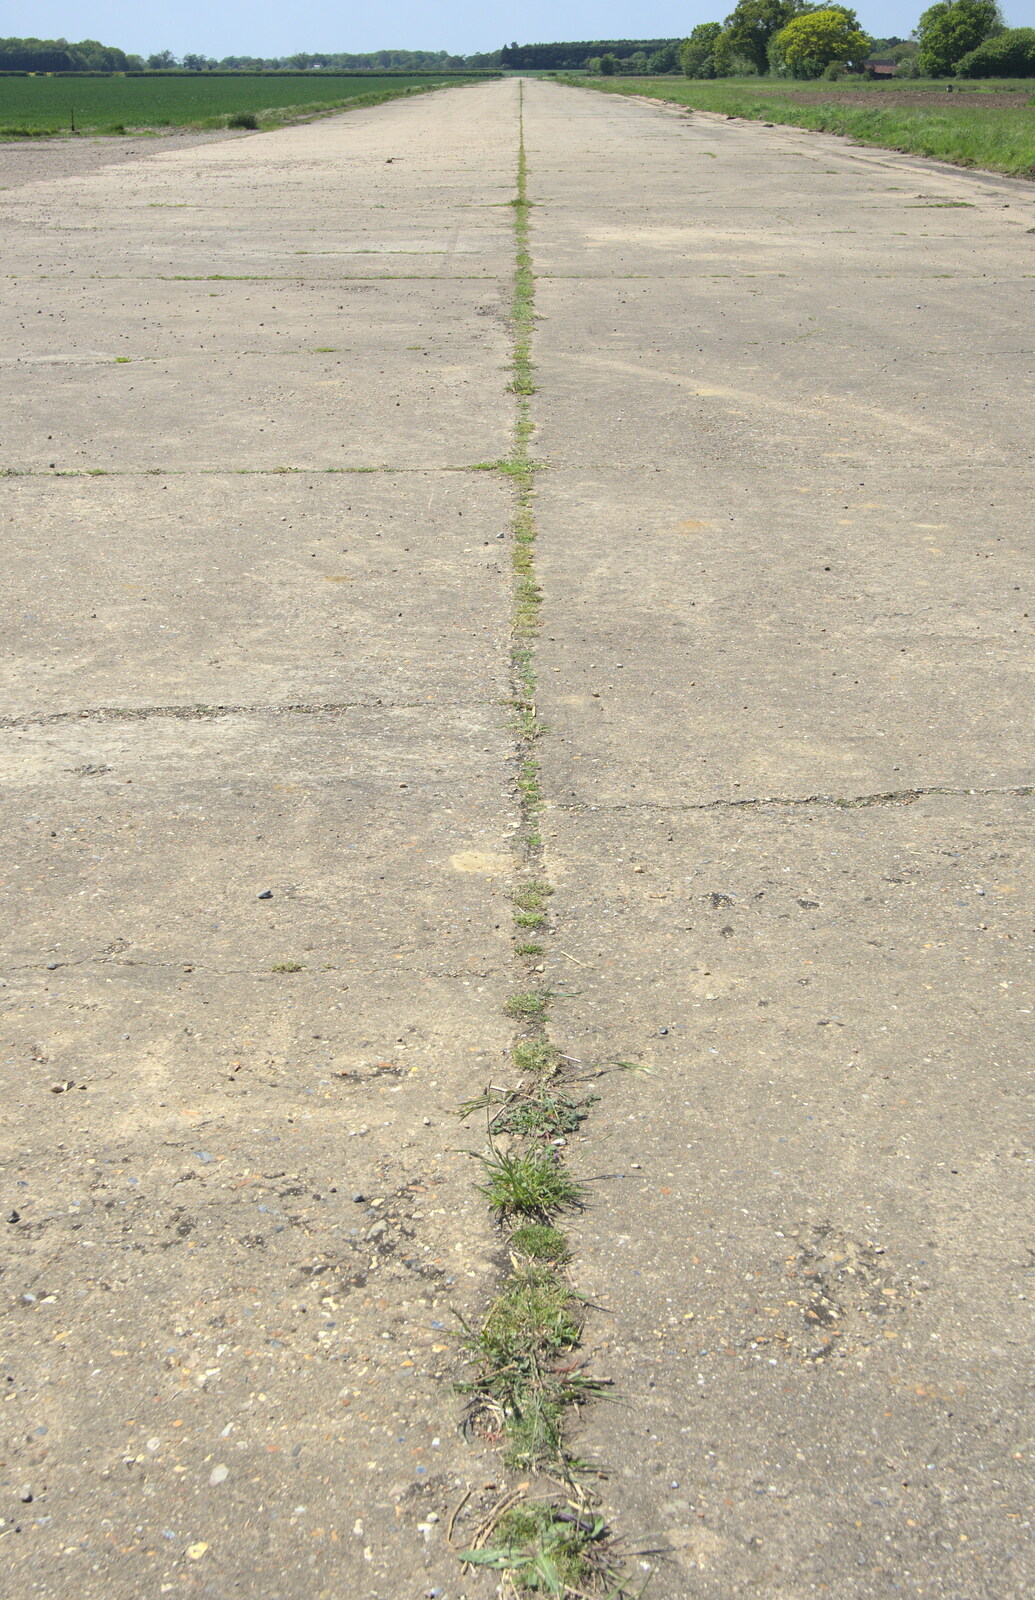 Part of the only remaining taxiway on the airfield from A "Sally B" B-17 Flypast, Thorpe Abbots, Norfolk - 27th May 2013